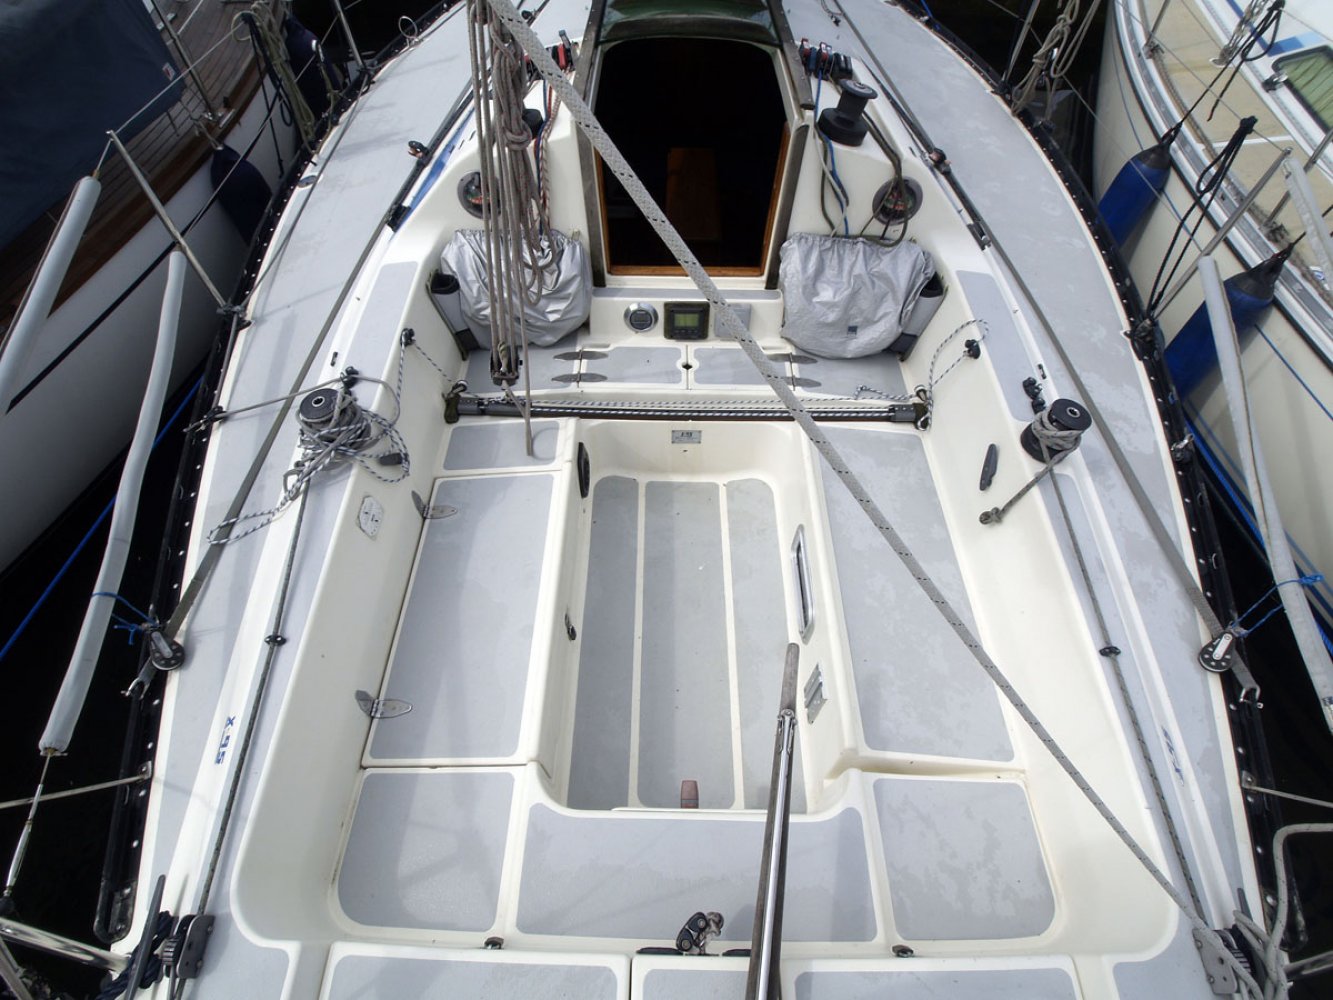 x 95 sailboat for sale